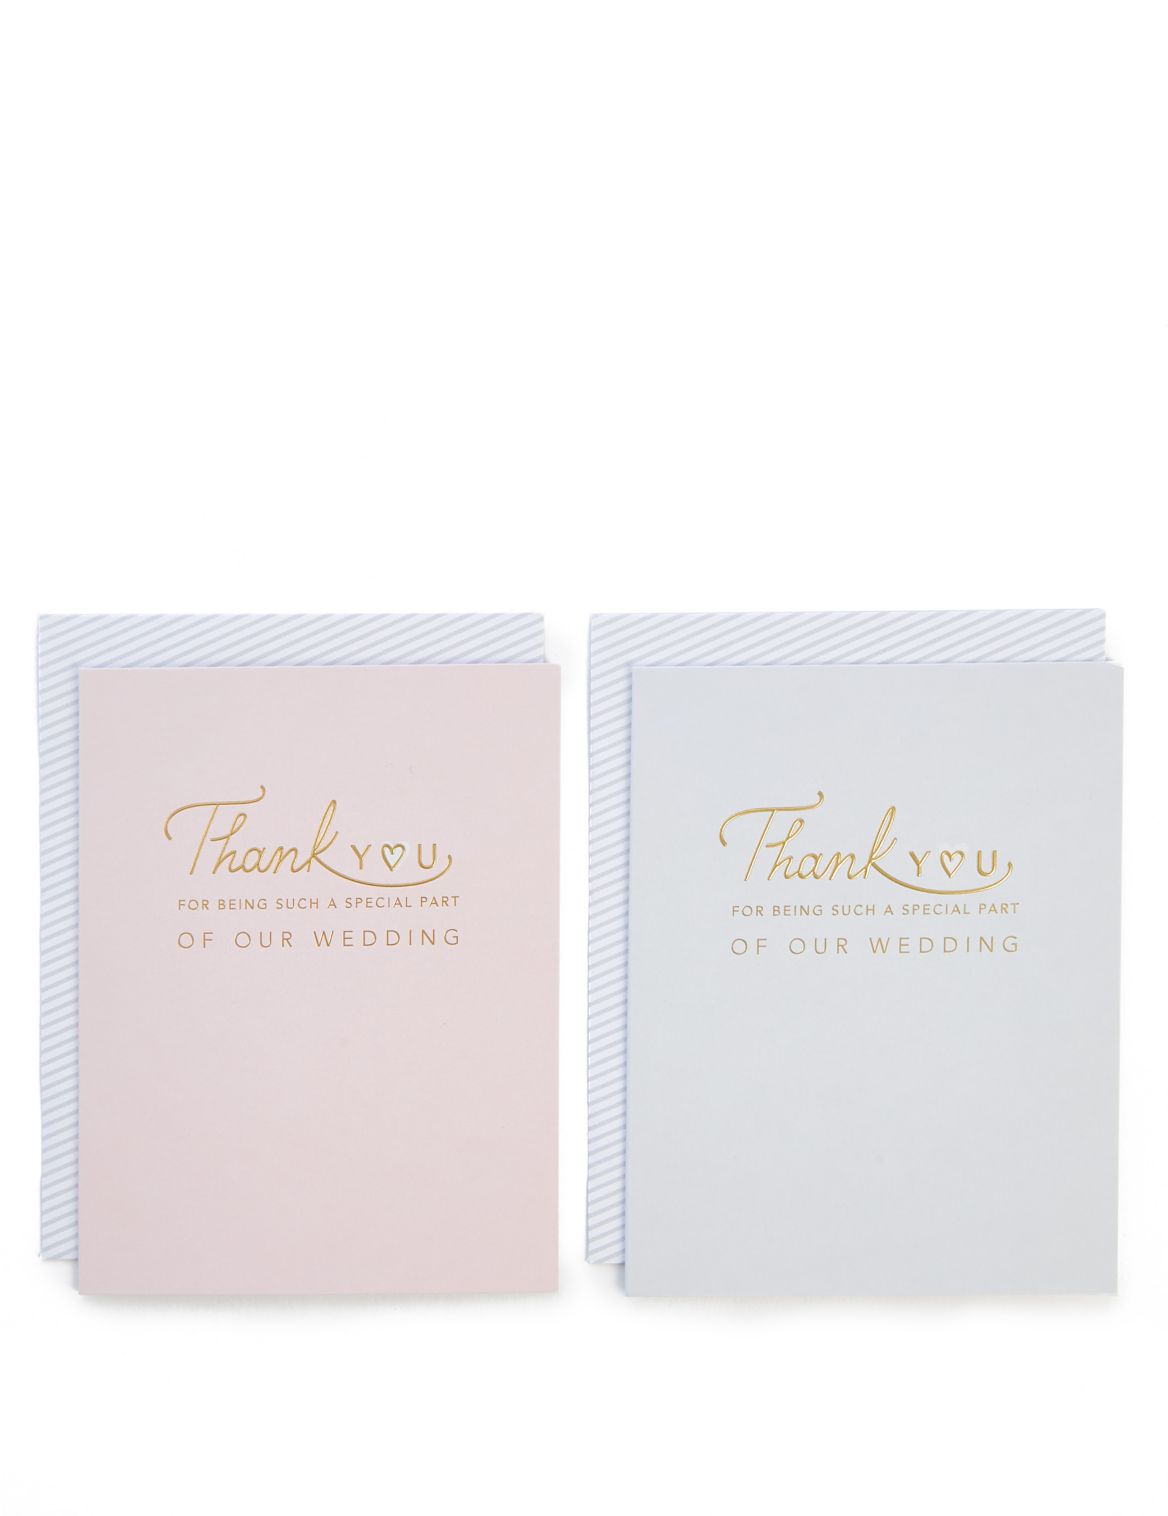 Pack of 8 Wedding Thank You Cards